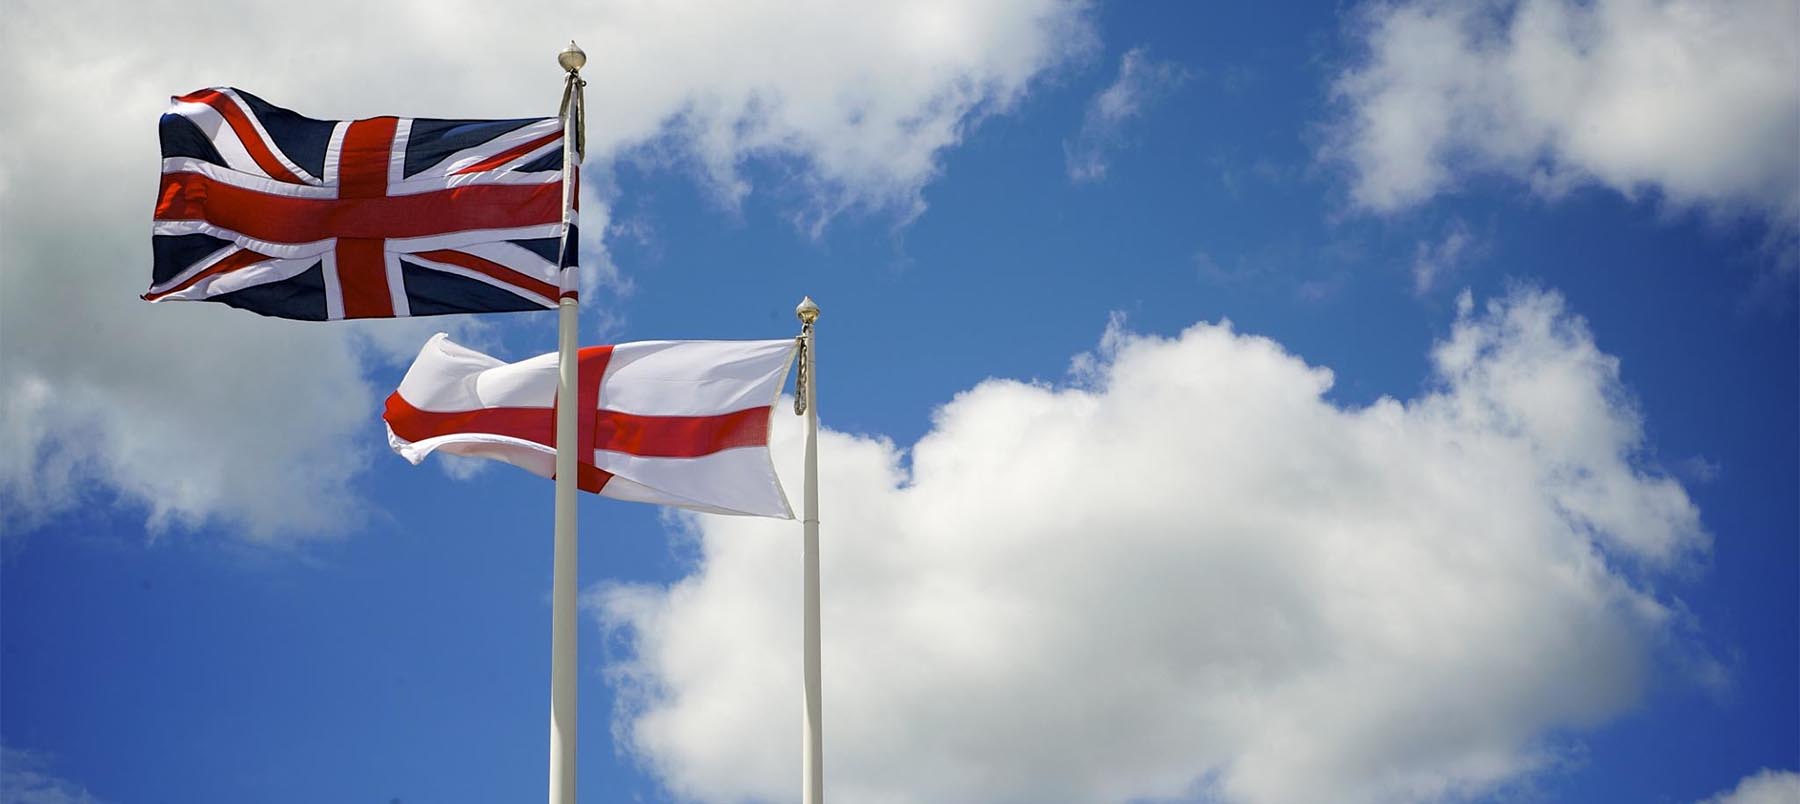 English and British flags fly side by side against blue skies